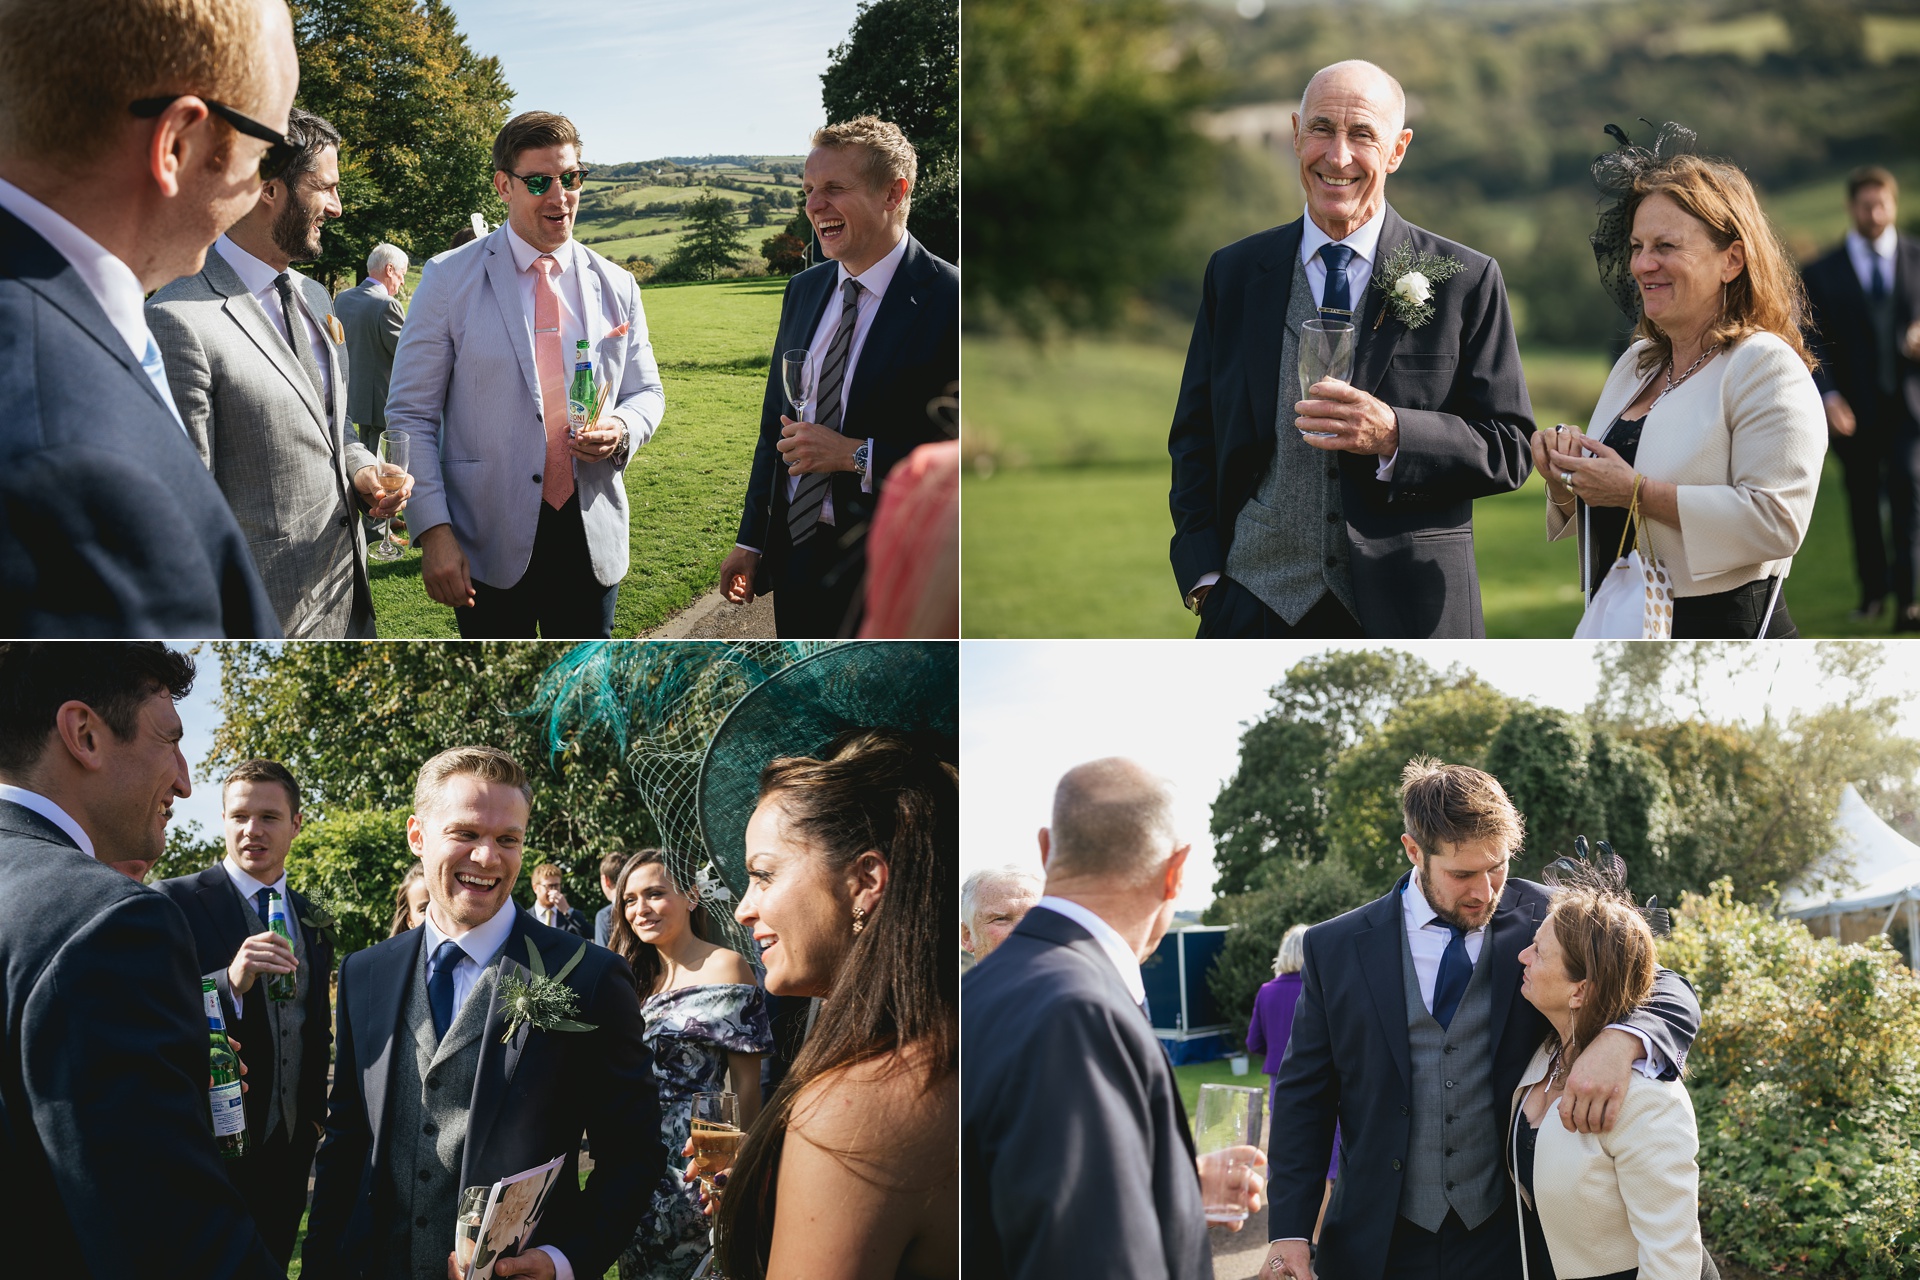 Wedding guests chatting and laughing in sunshine